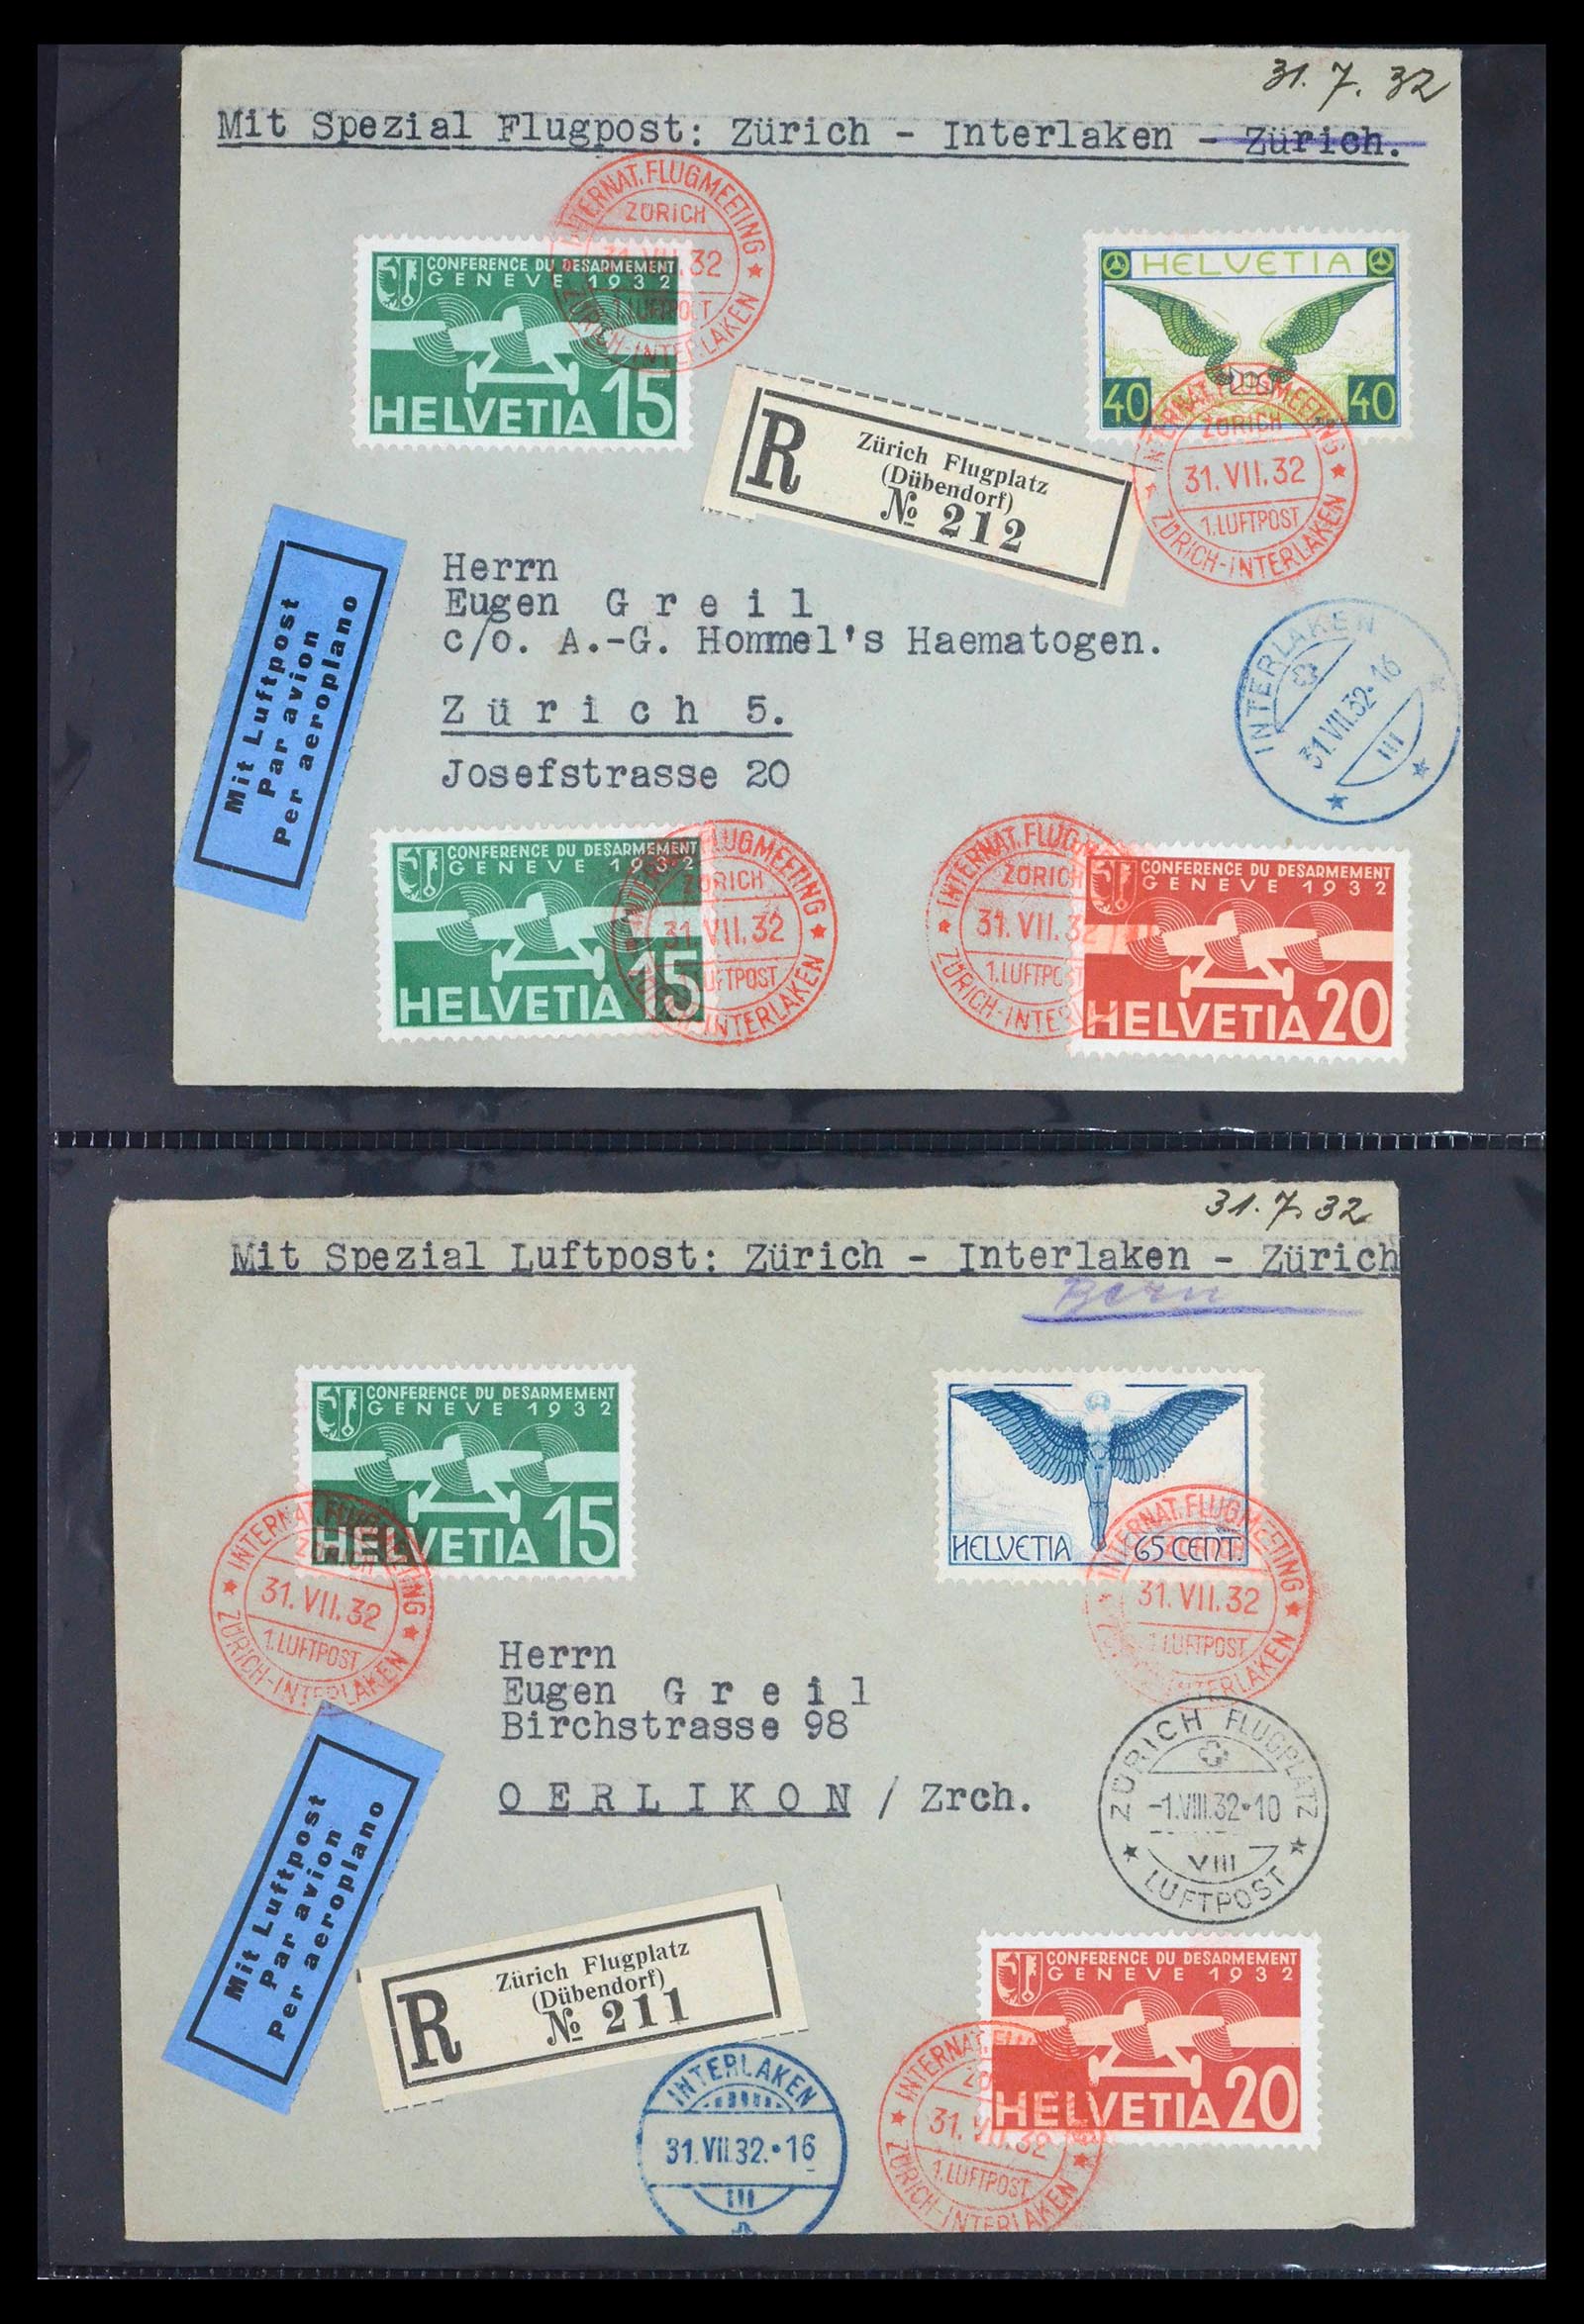 39533 0009 - Stamp collection 39533 Zwitserland airmail covers 1925-1960.